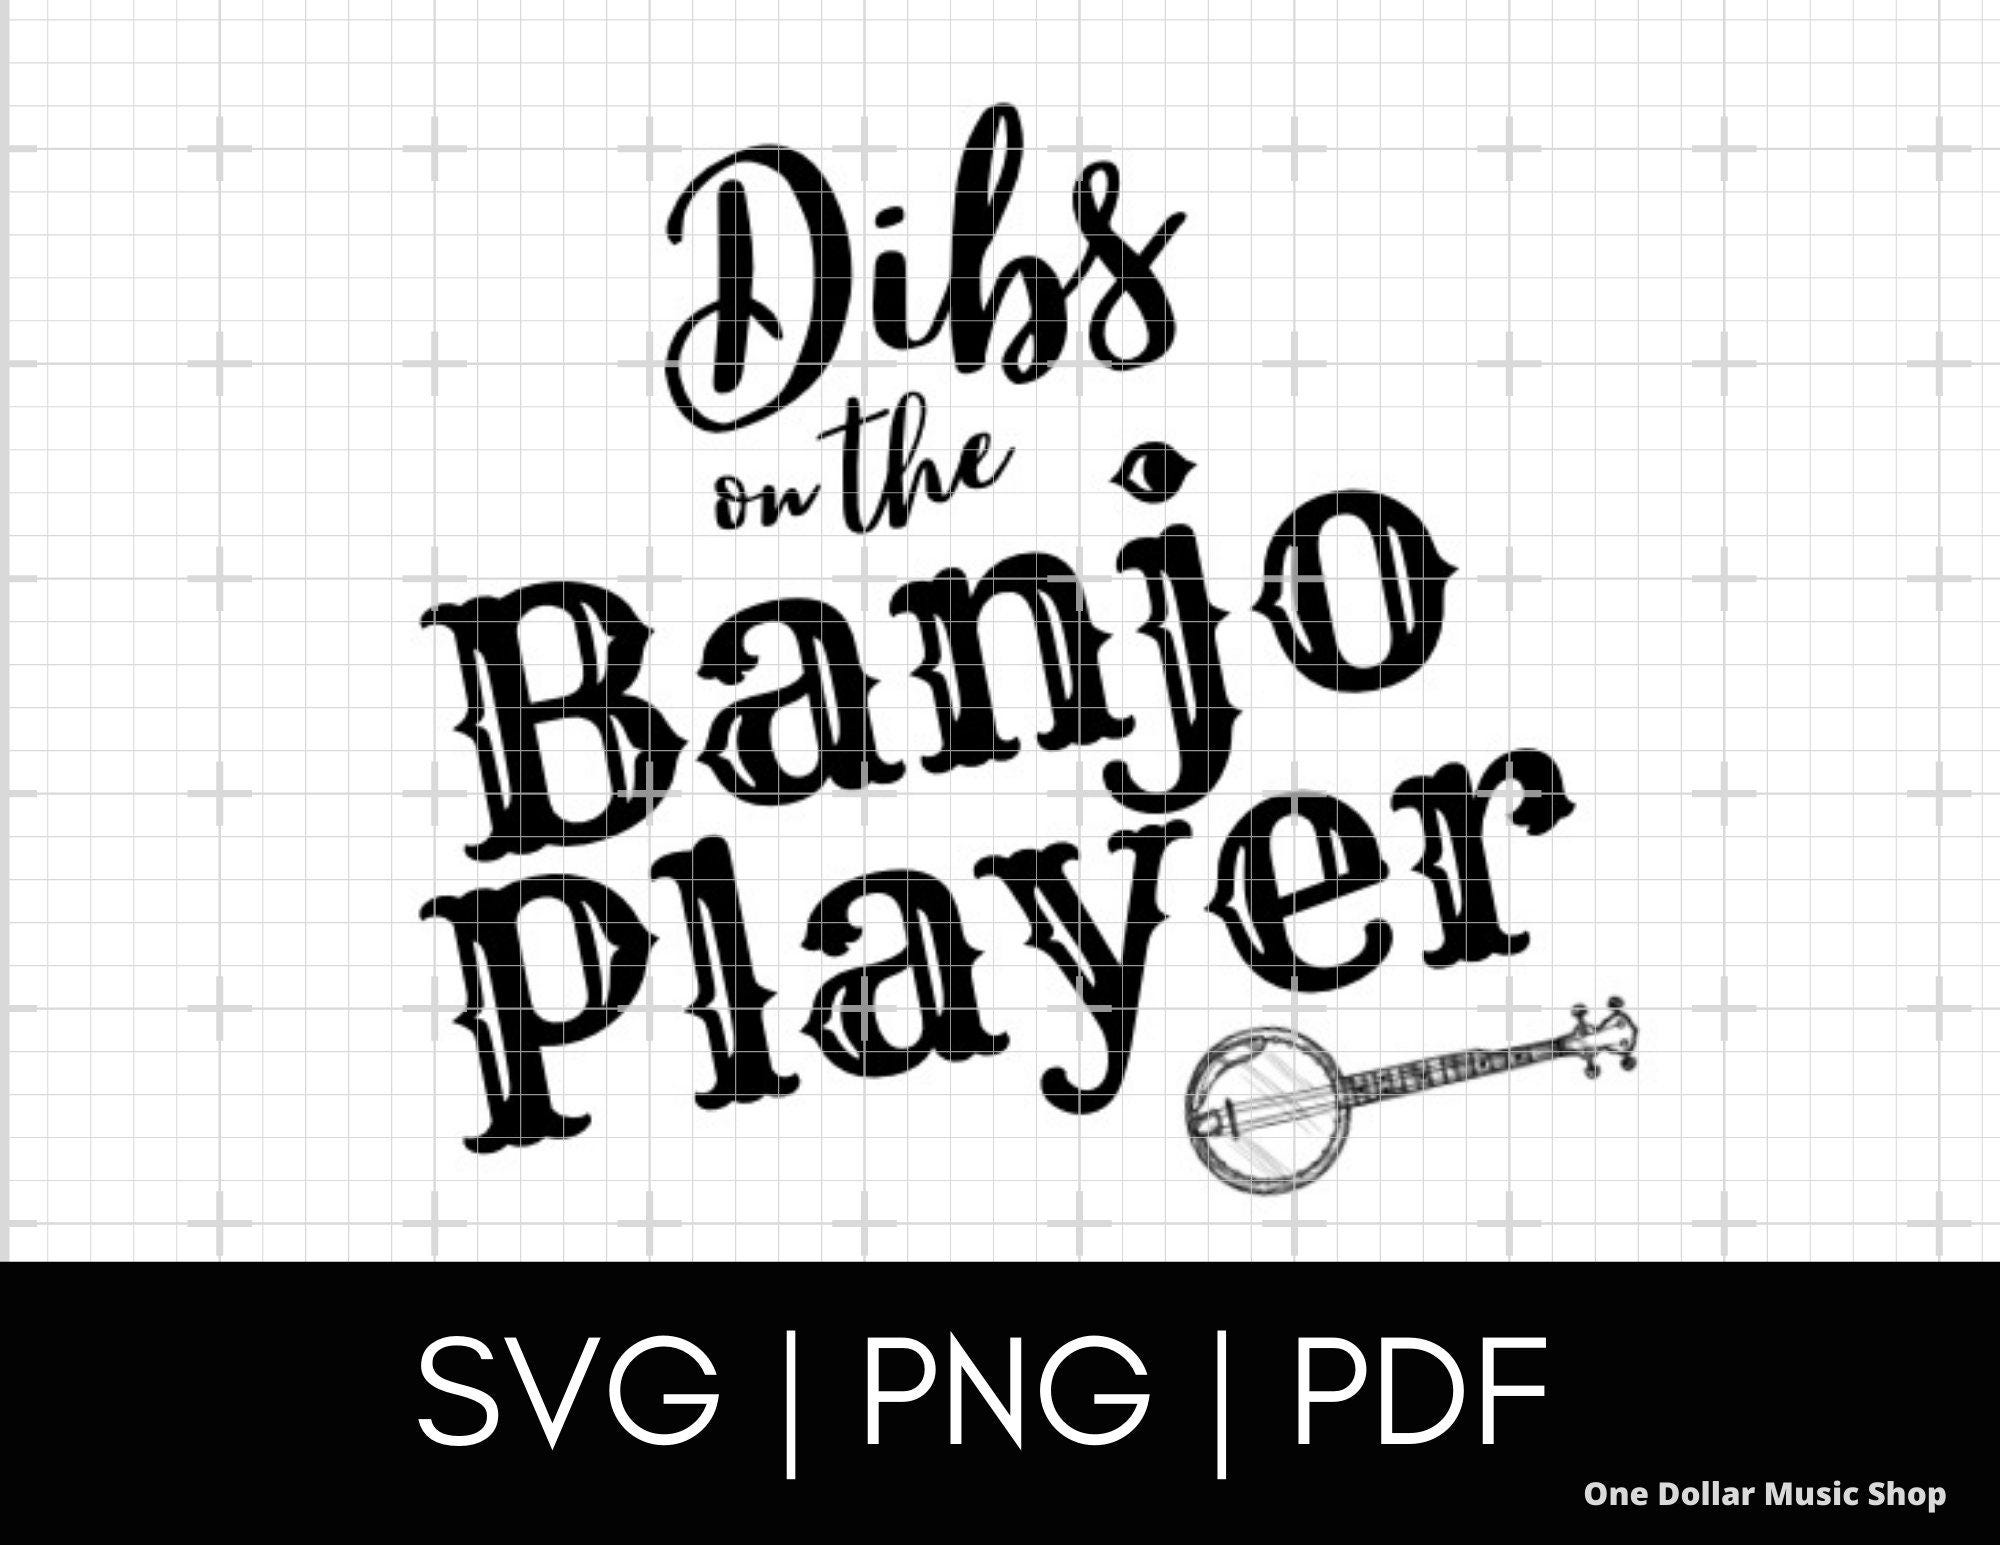 Dibs on the Banjo Player, Funny Music SVG PNG PDF Music svg Vector Cut File, Glitch Free svg Files for Cricut Items